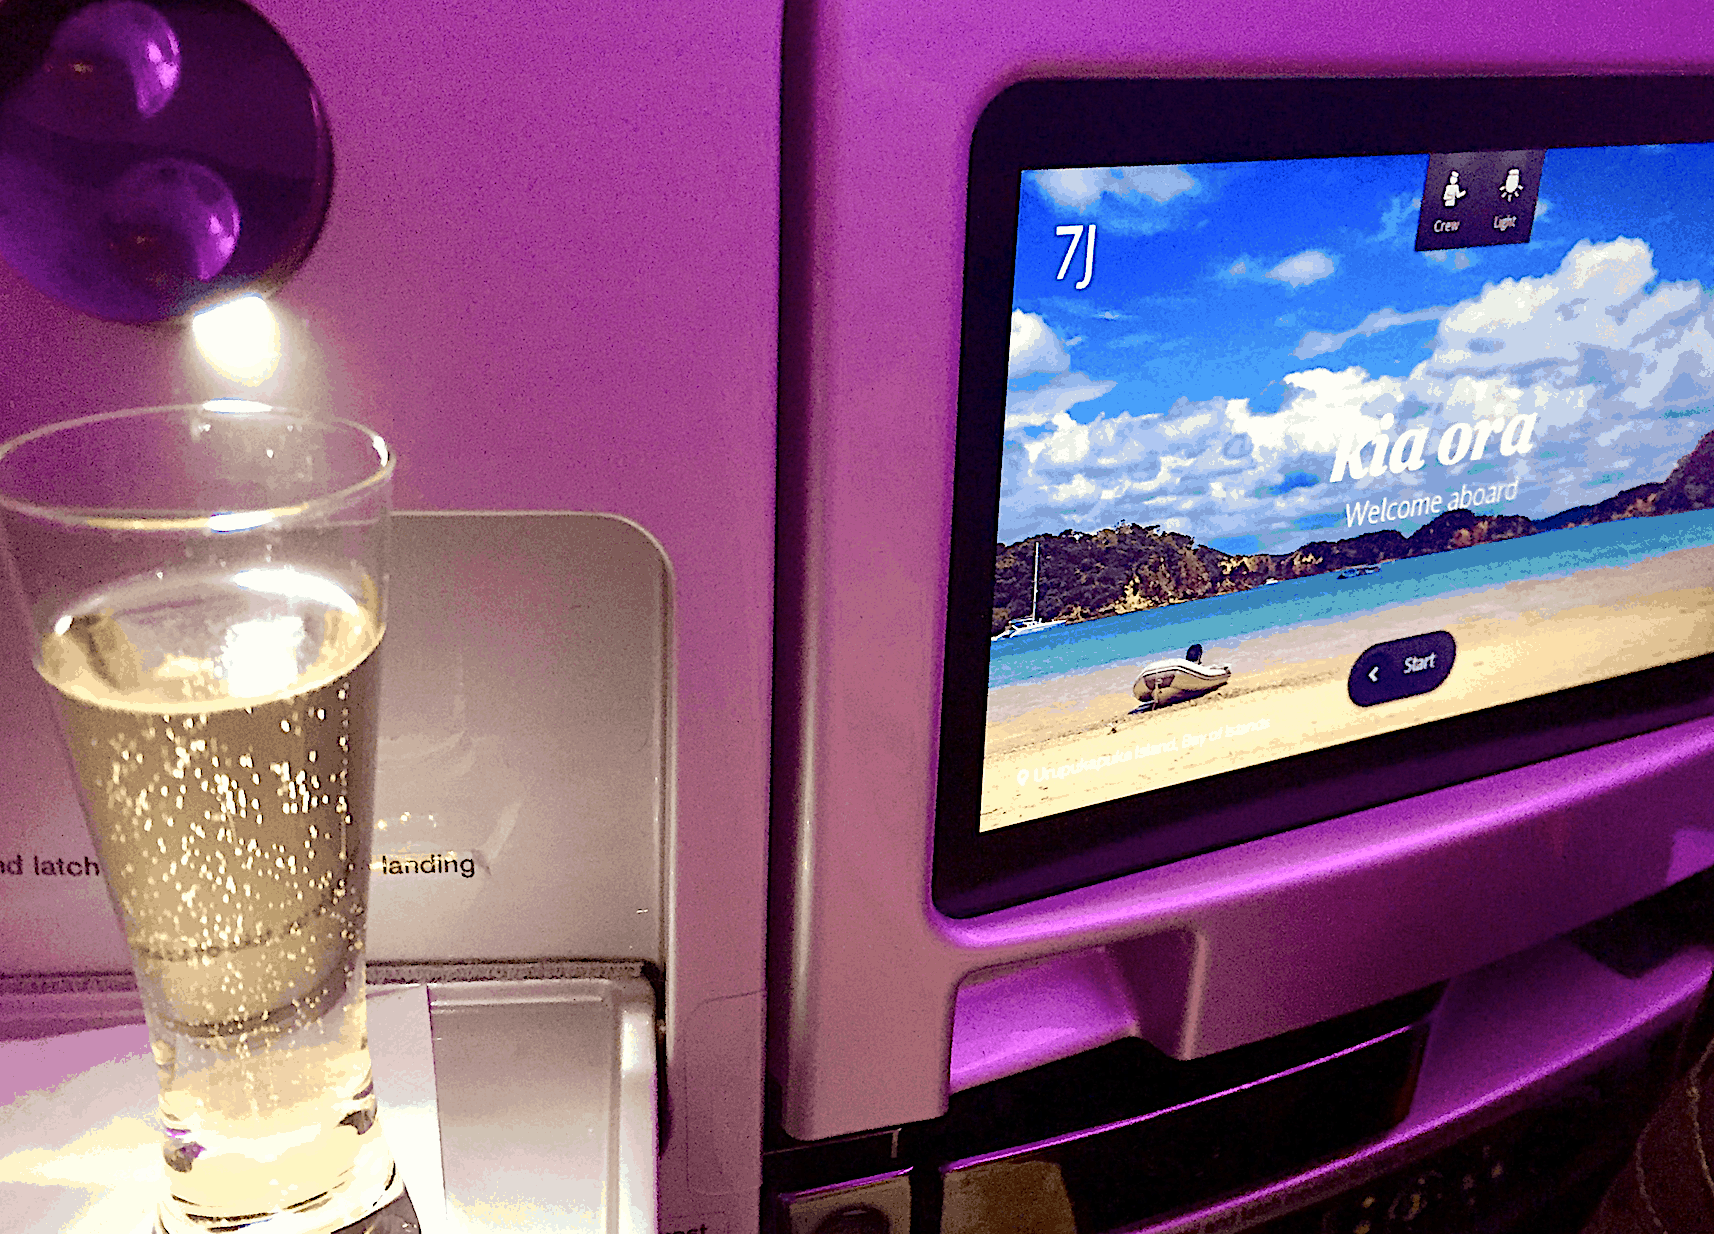 onboard Air New Zealand